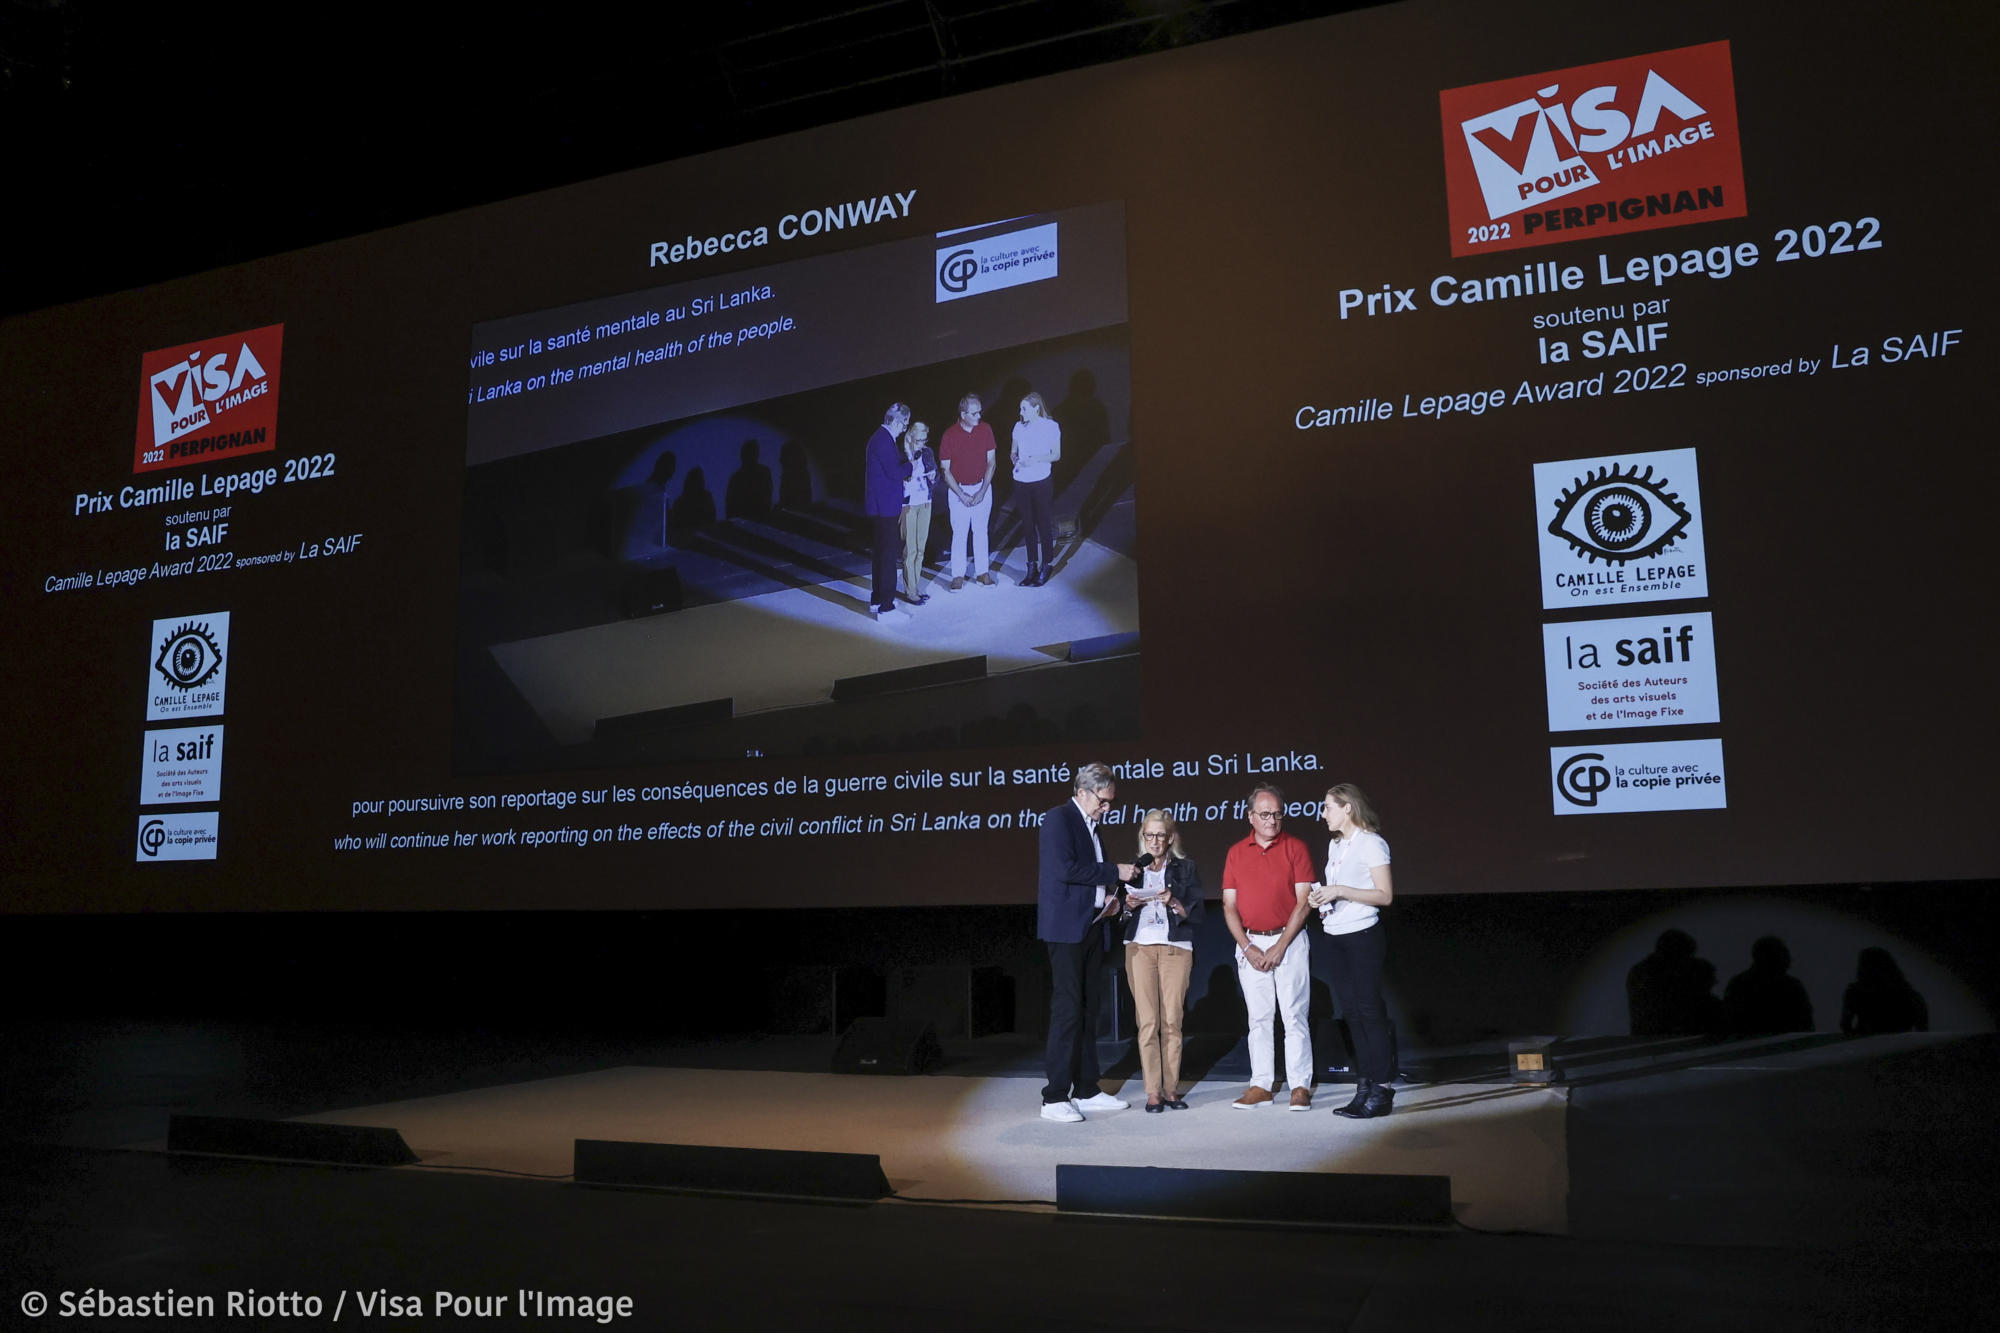 Visa pour l’image 2022 : exhibition Ana Maria Arevalo Gosen, winner of the 2021 Camille Lepage award –  Rebecca Conway, winner 2022